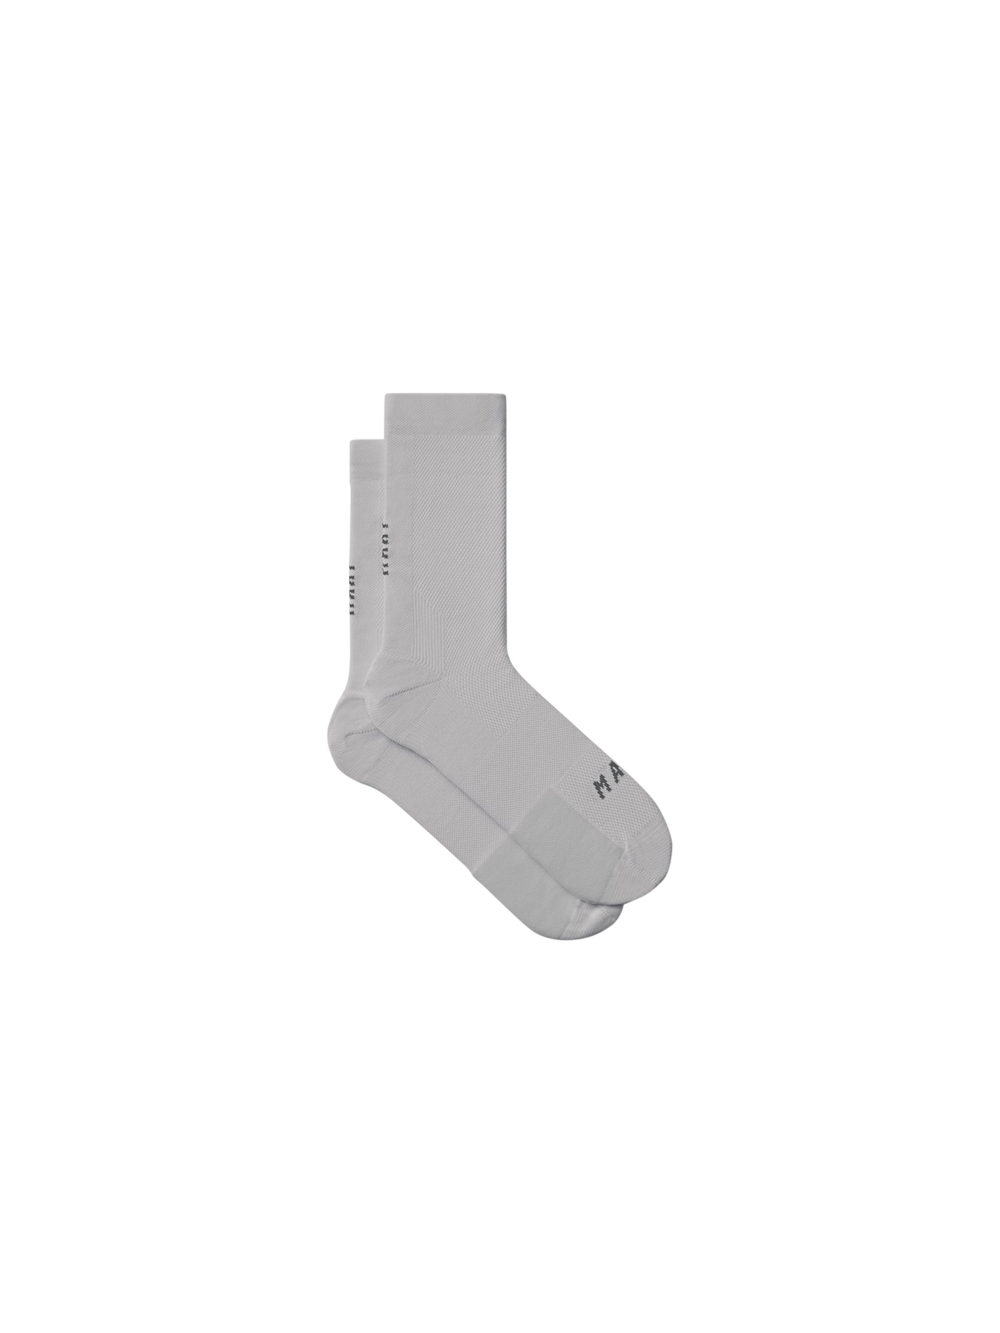 Product Image for Division Mono Sock